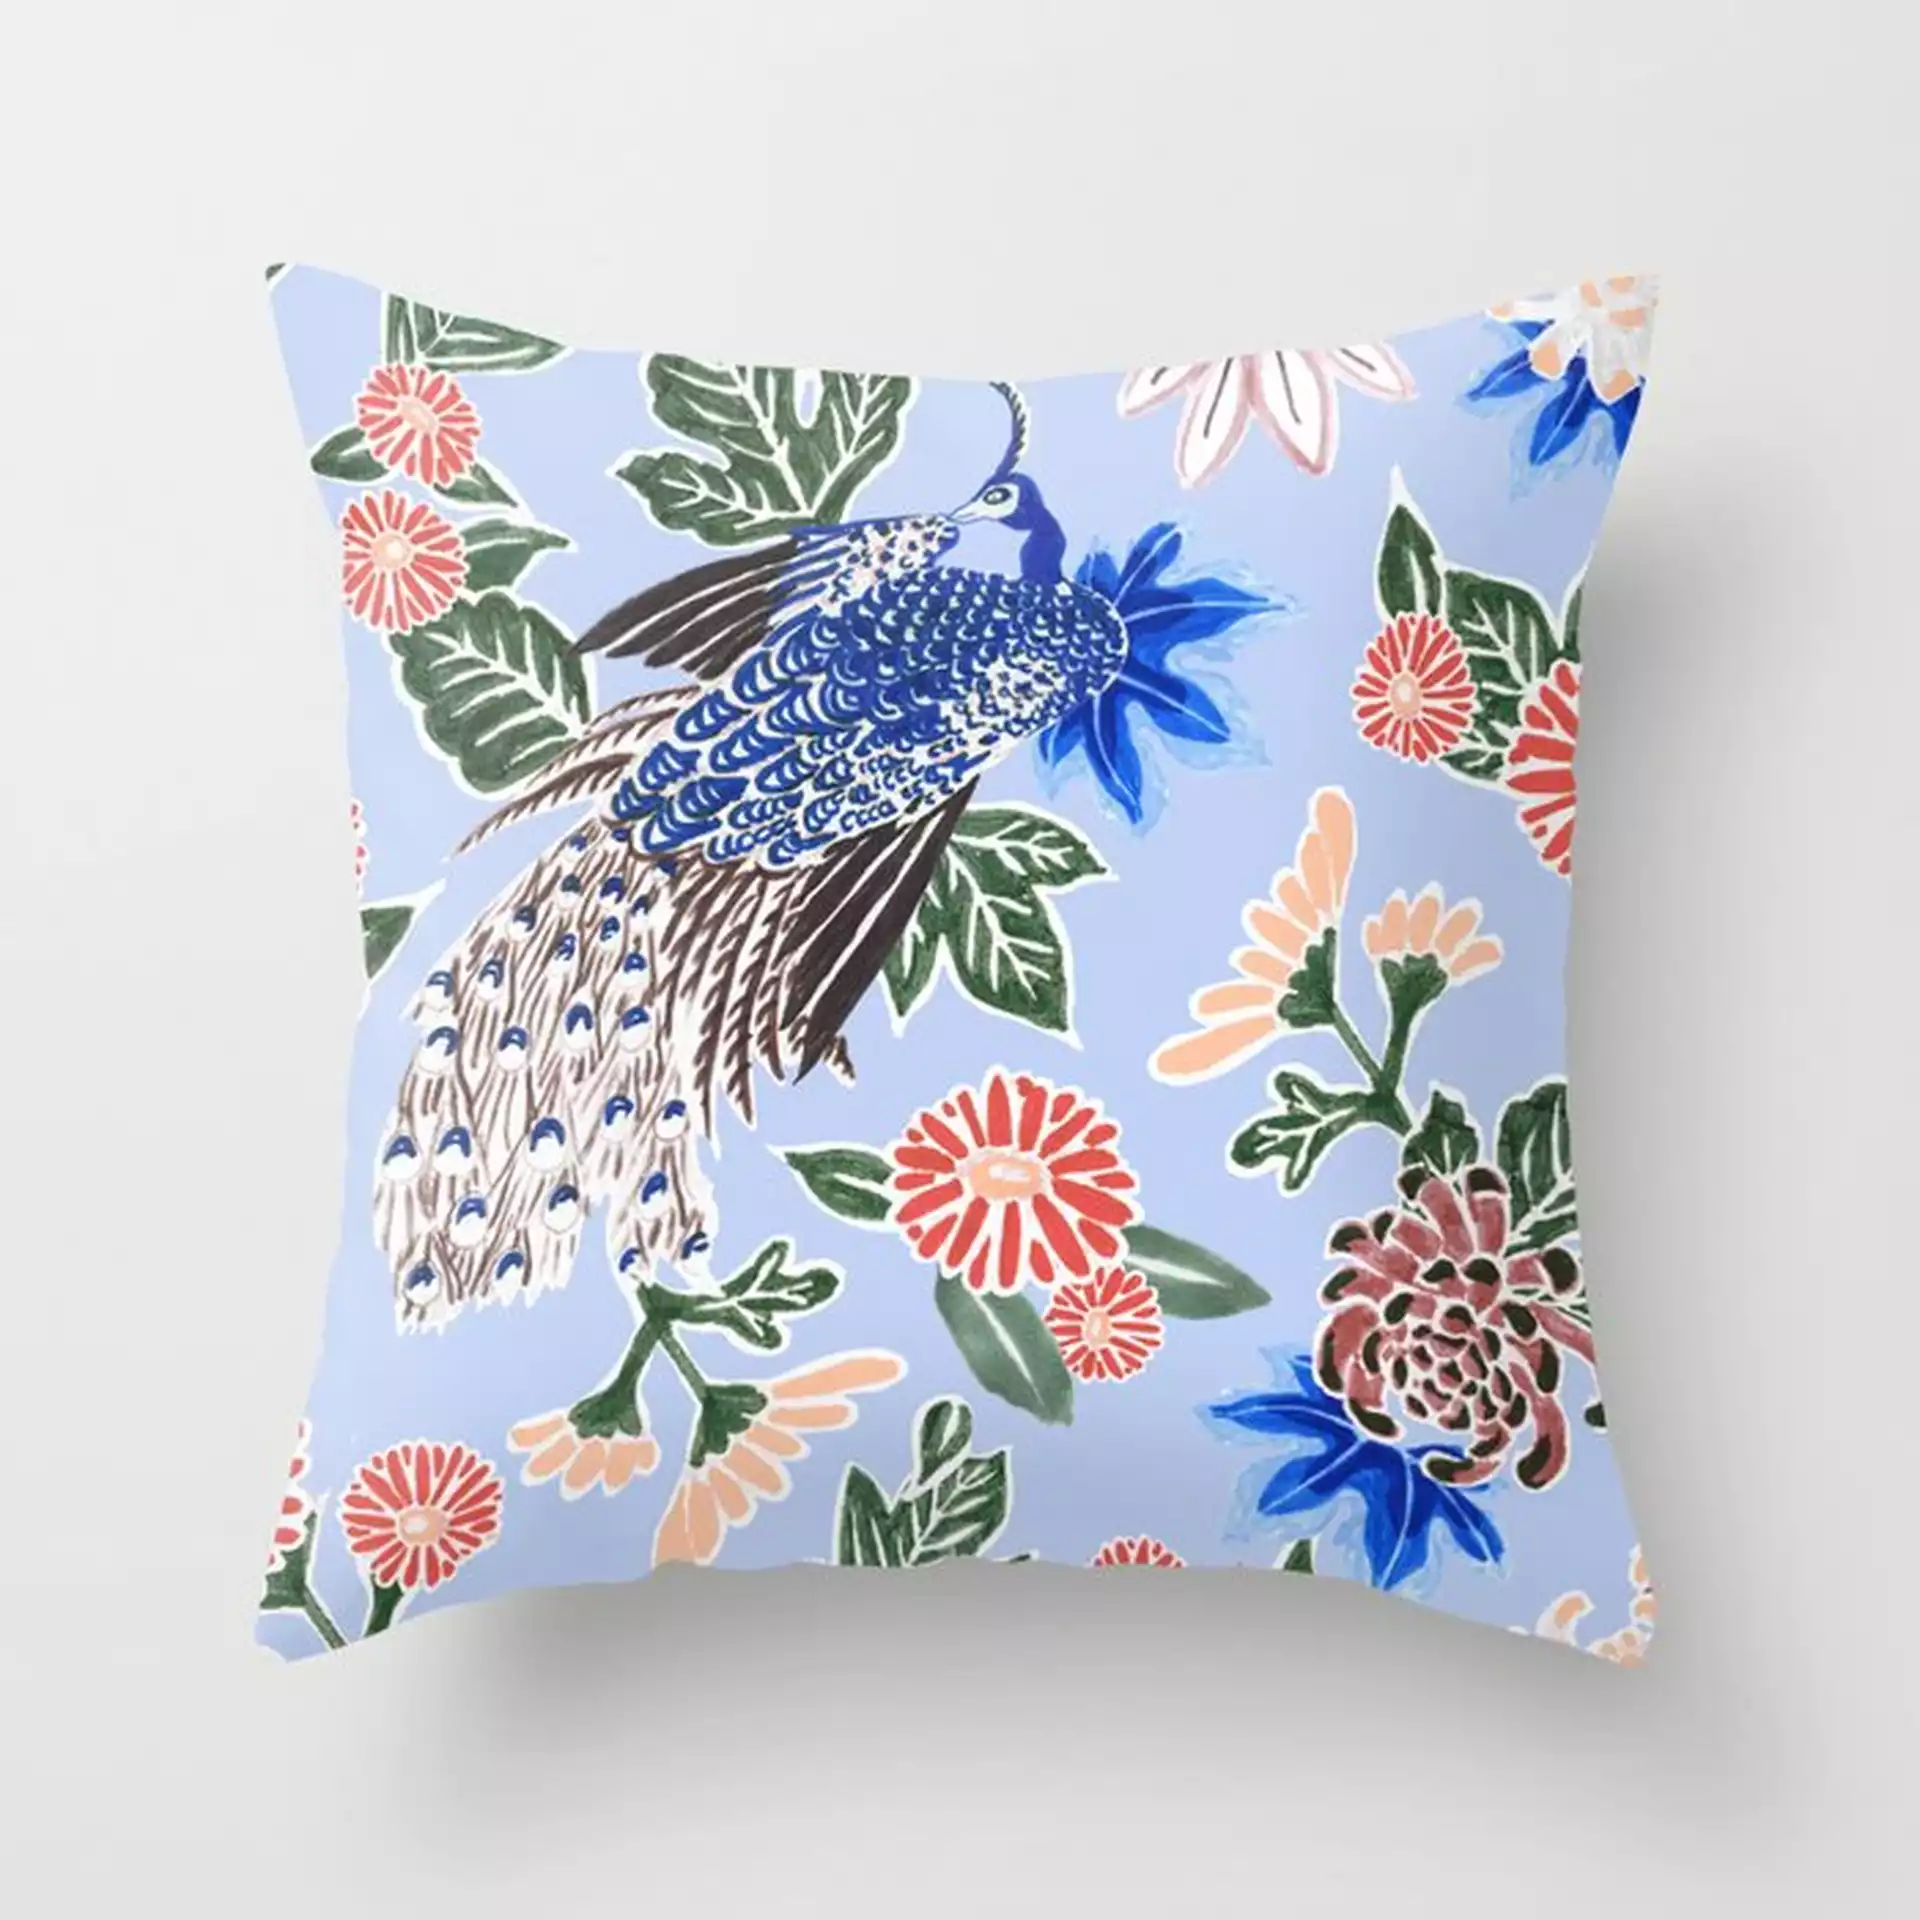 Peacock Floral In Baby Blue Couch Throw Pillow by Becky Bailey - Cover (16" x 16") with pillow insert - Outdoor Pillow